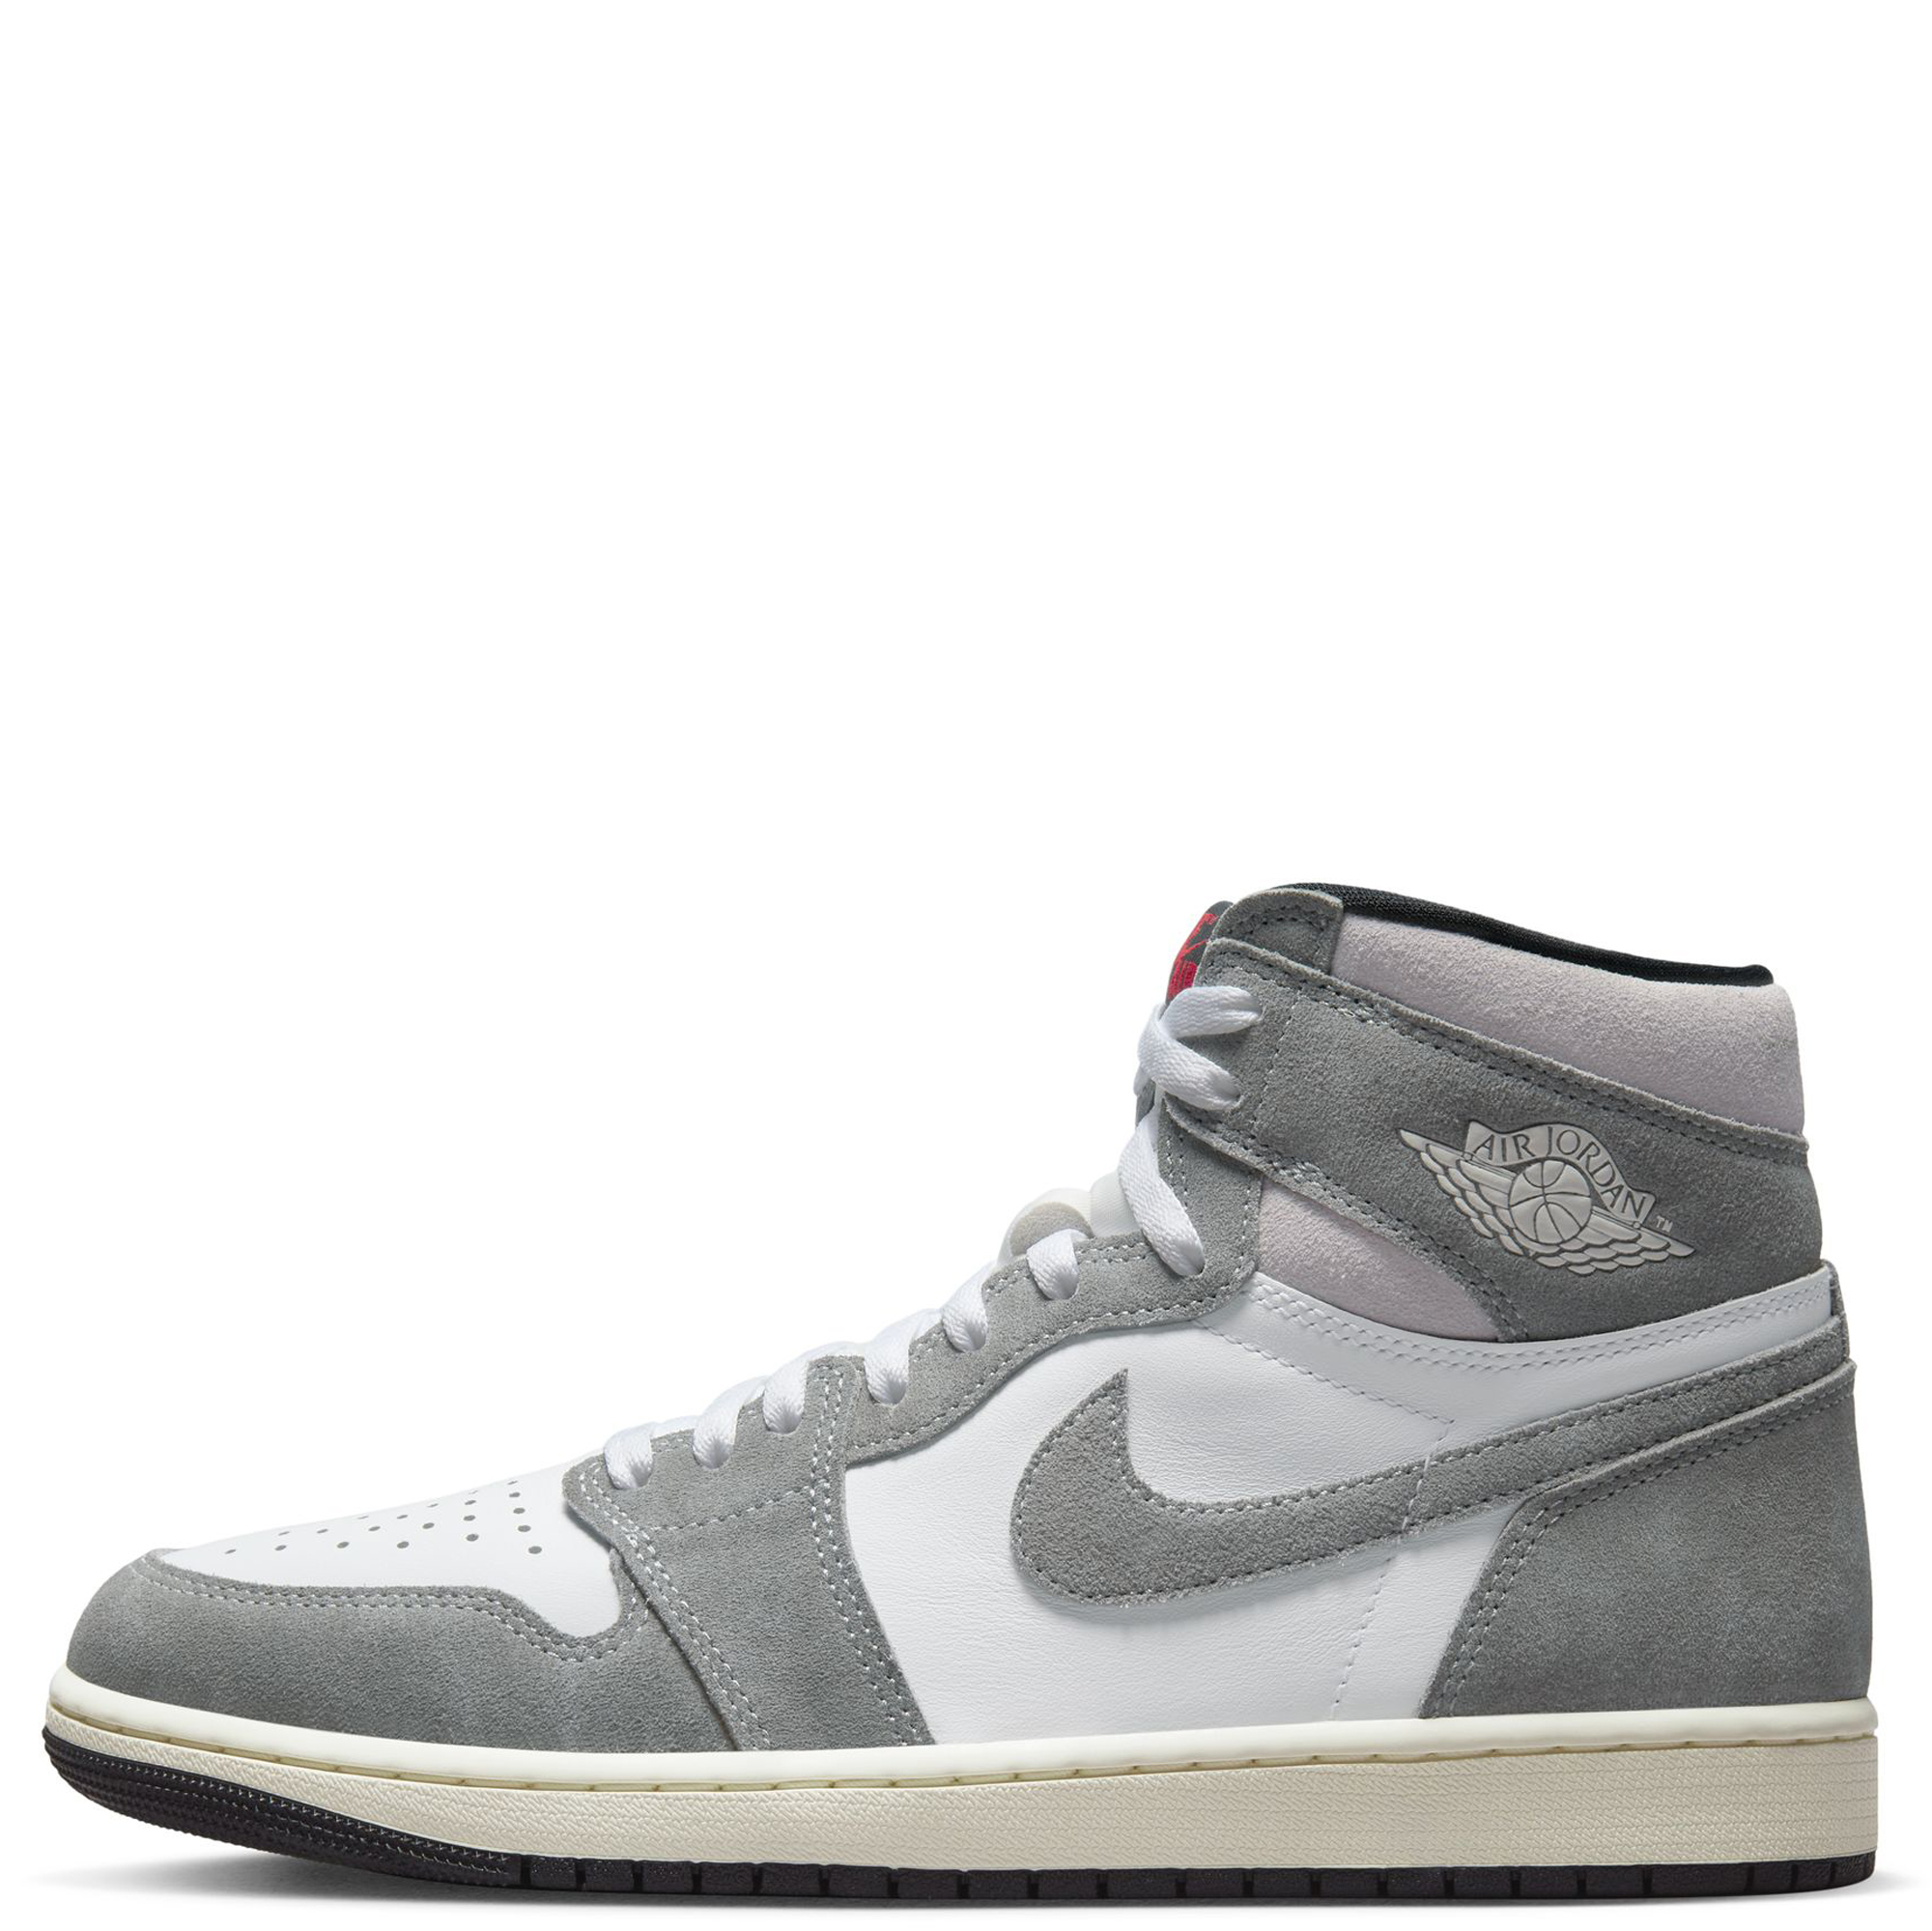 SO CLEAN! Air Jordan 1 Mid Light Smoke Grey On Foot Review and How